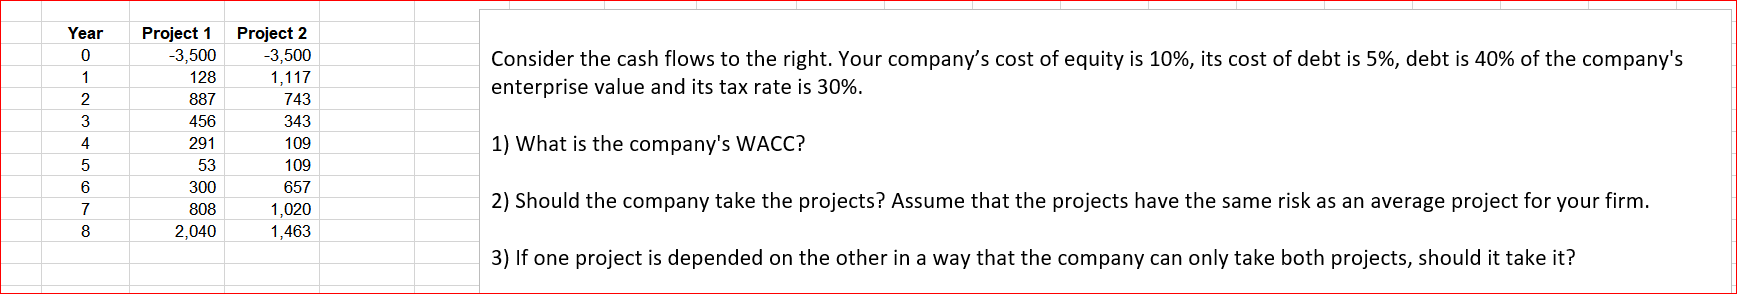 1) What is the company's WACC?
2) Should the company take the projects? Assume that the projects have the same risk as an average project for your firm.
3) If one project is depended on the other in a way that the company can only take both projects, should it take it?
